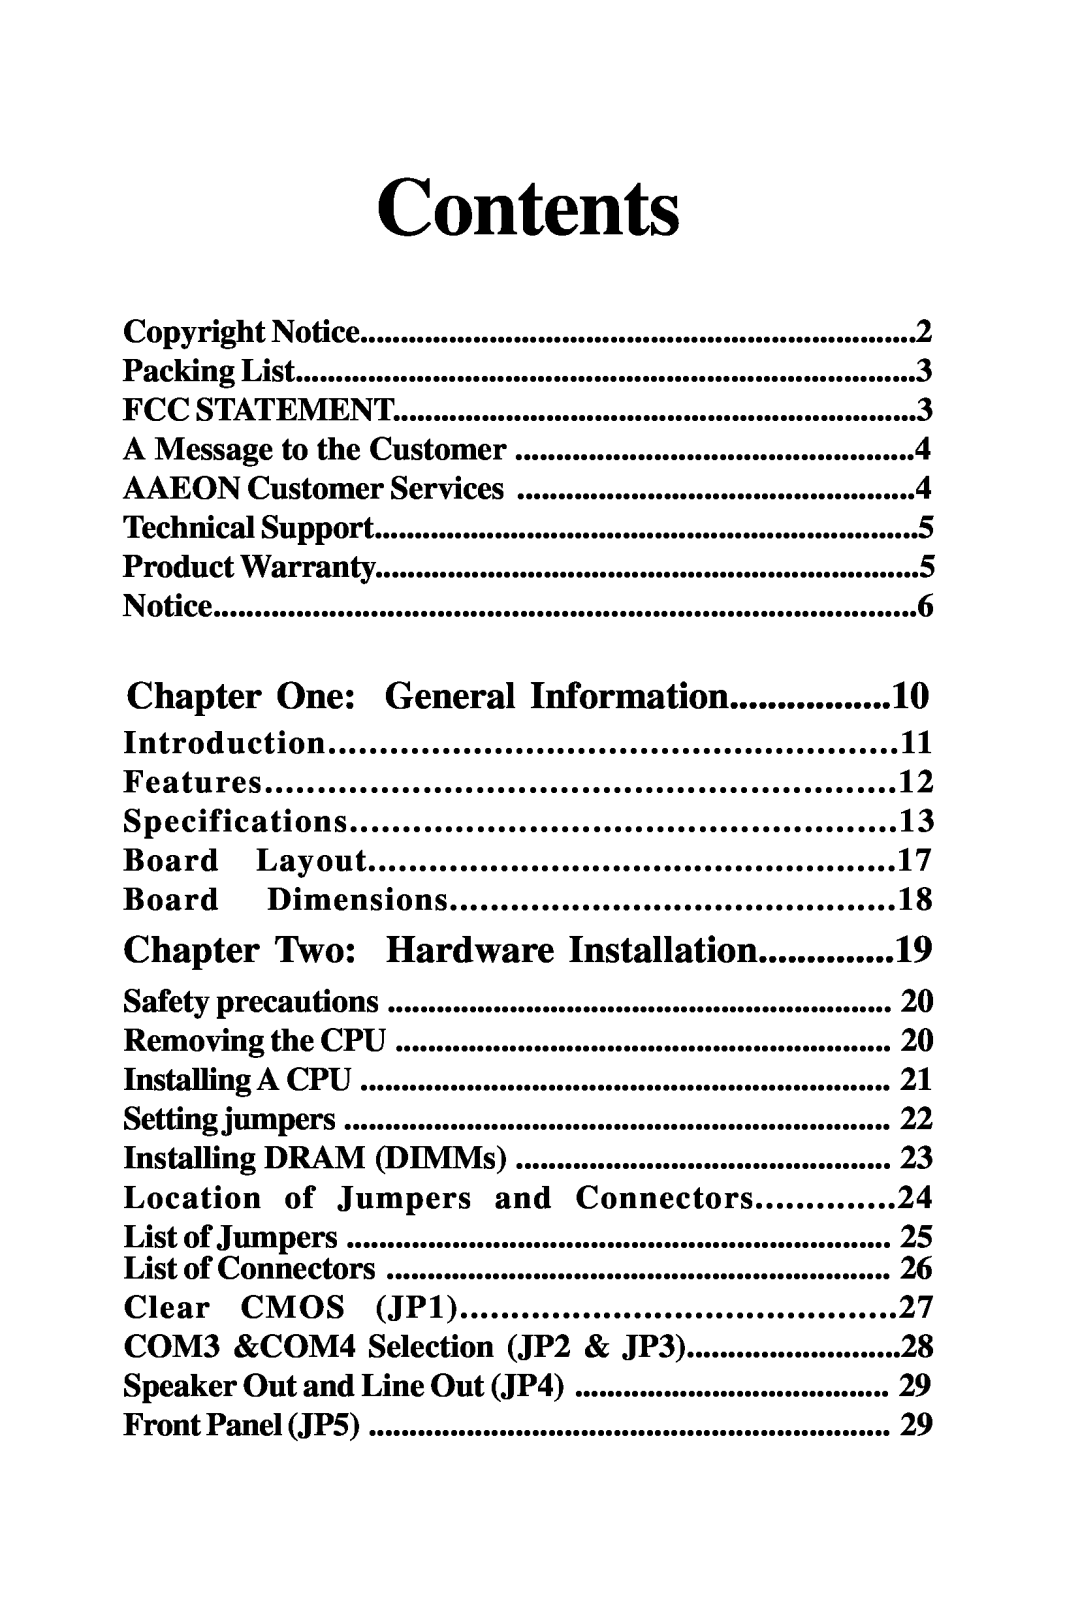 Intel PCM-6896 manual Chapter One General Information, Chapter Two Hardware Installation, Contents 